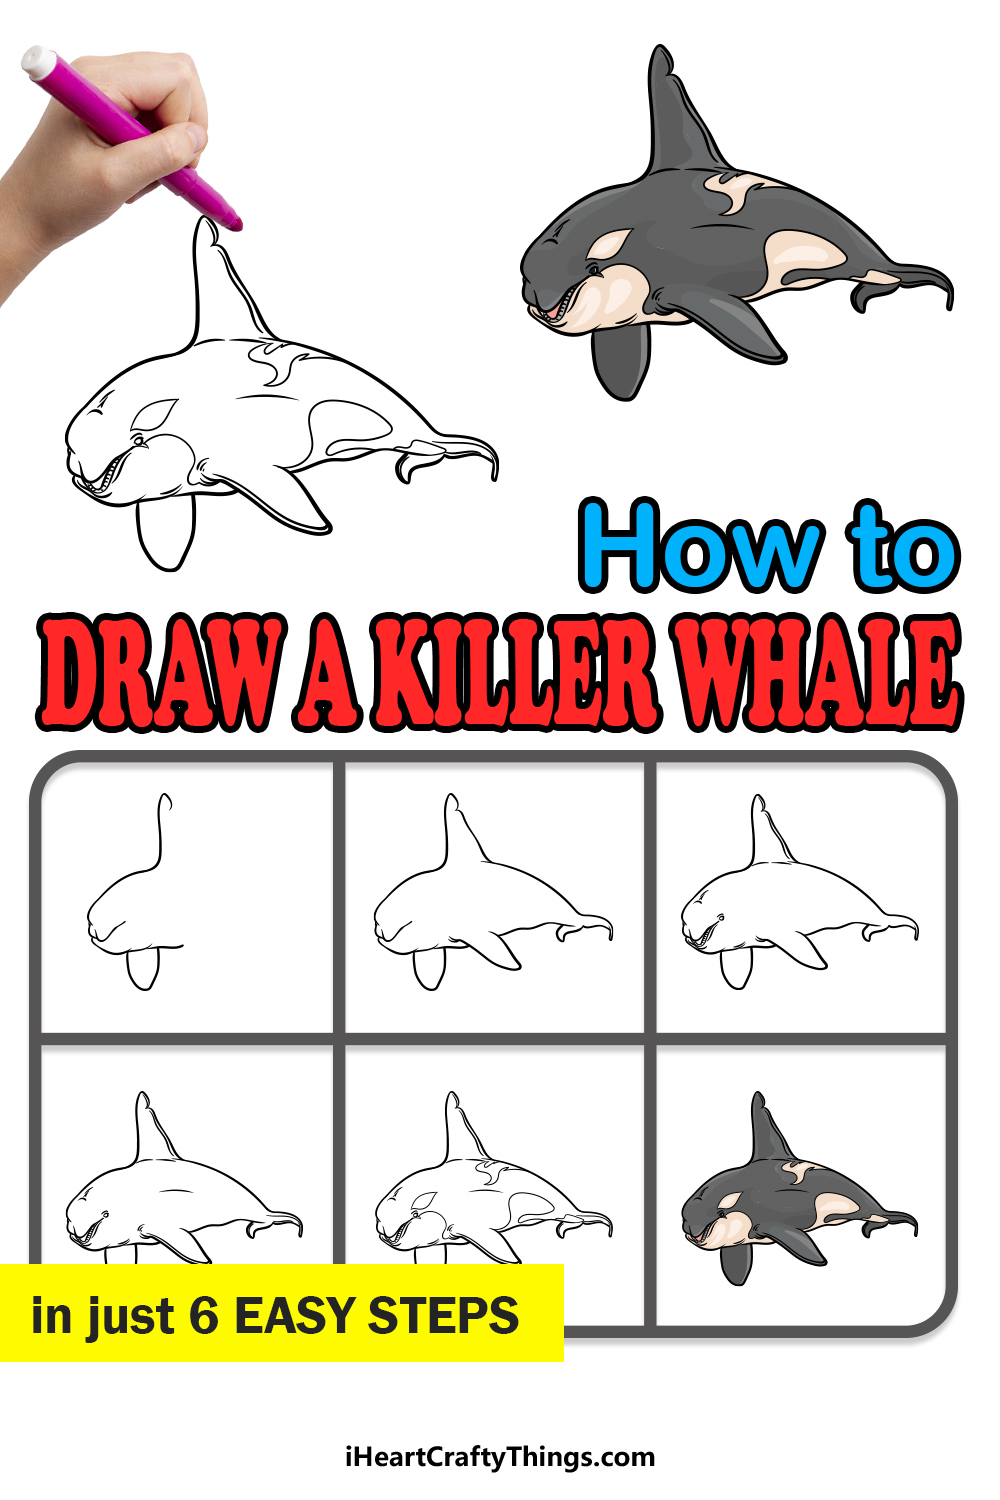 how to draw a killer whale in 6 easy steps